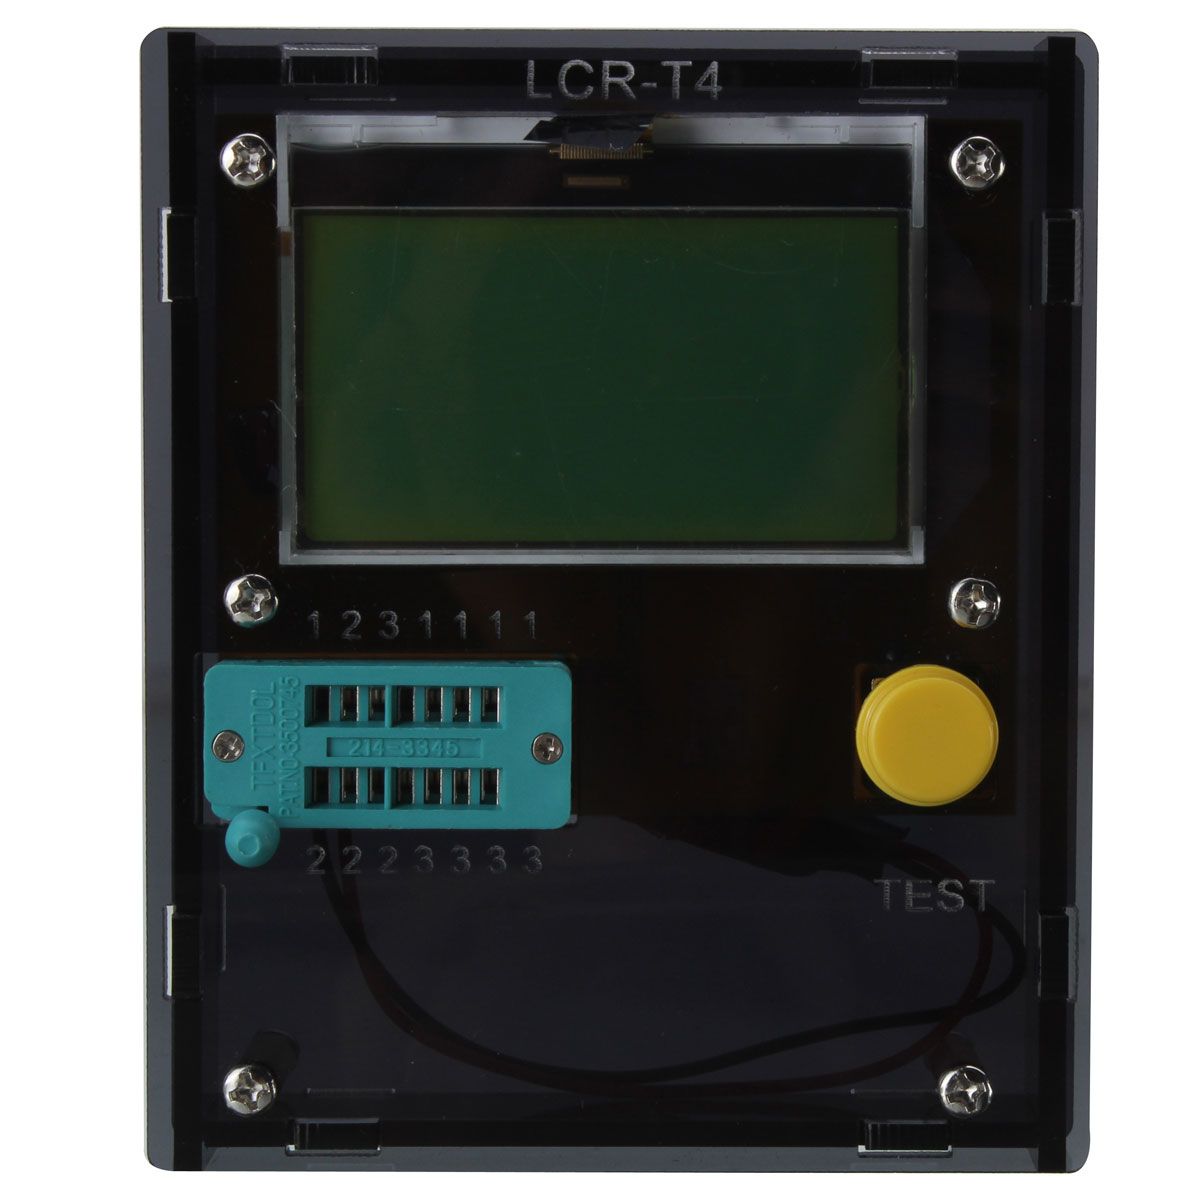 LCR-T4-Transistor-Tester-Diode-Triode-LCD-ESR-Meter-Inductance-With-Housing-1012208